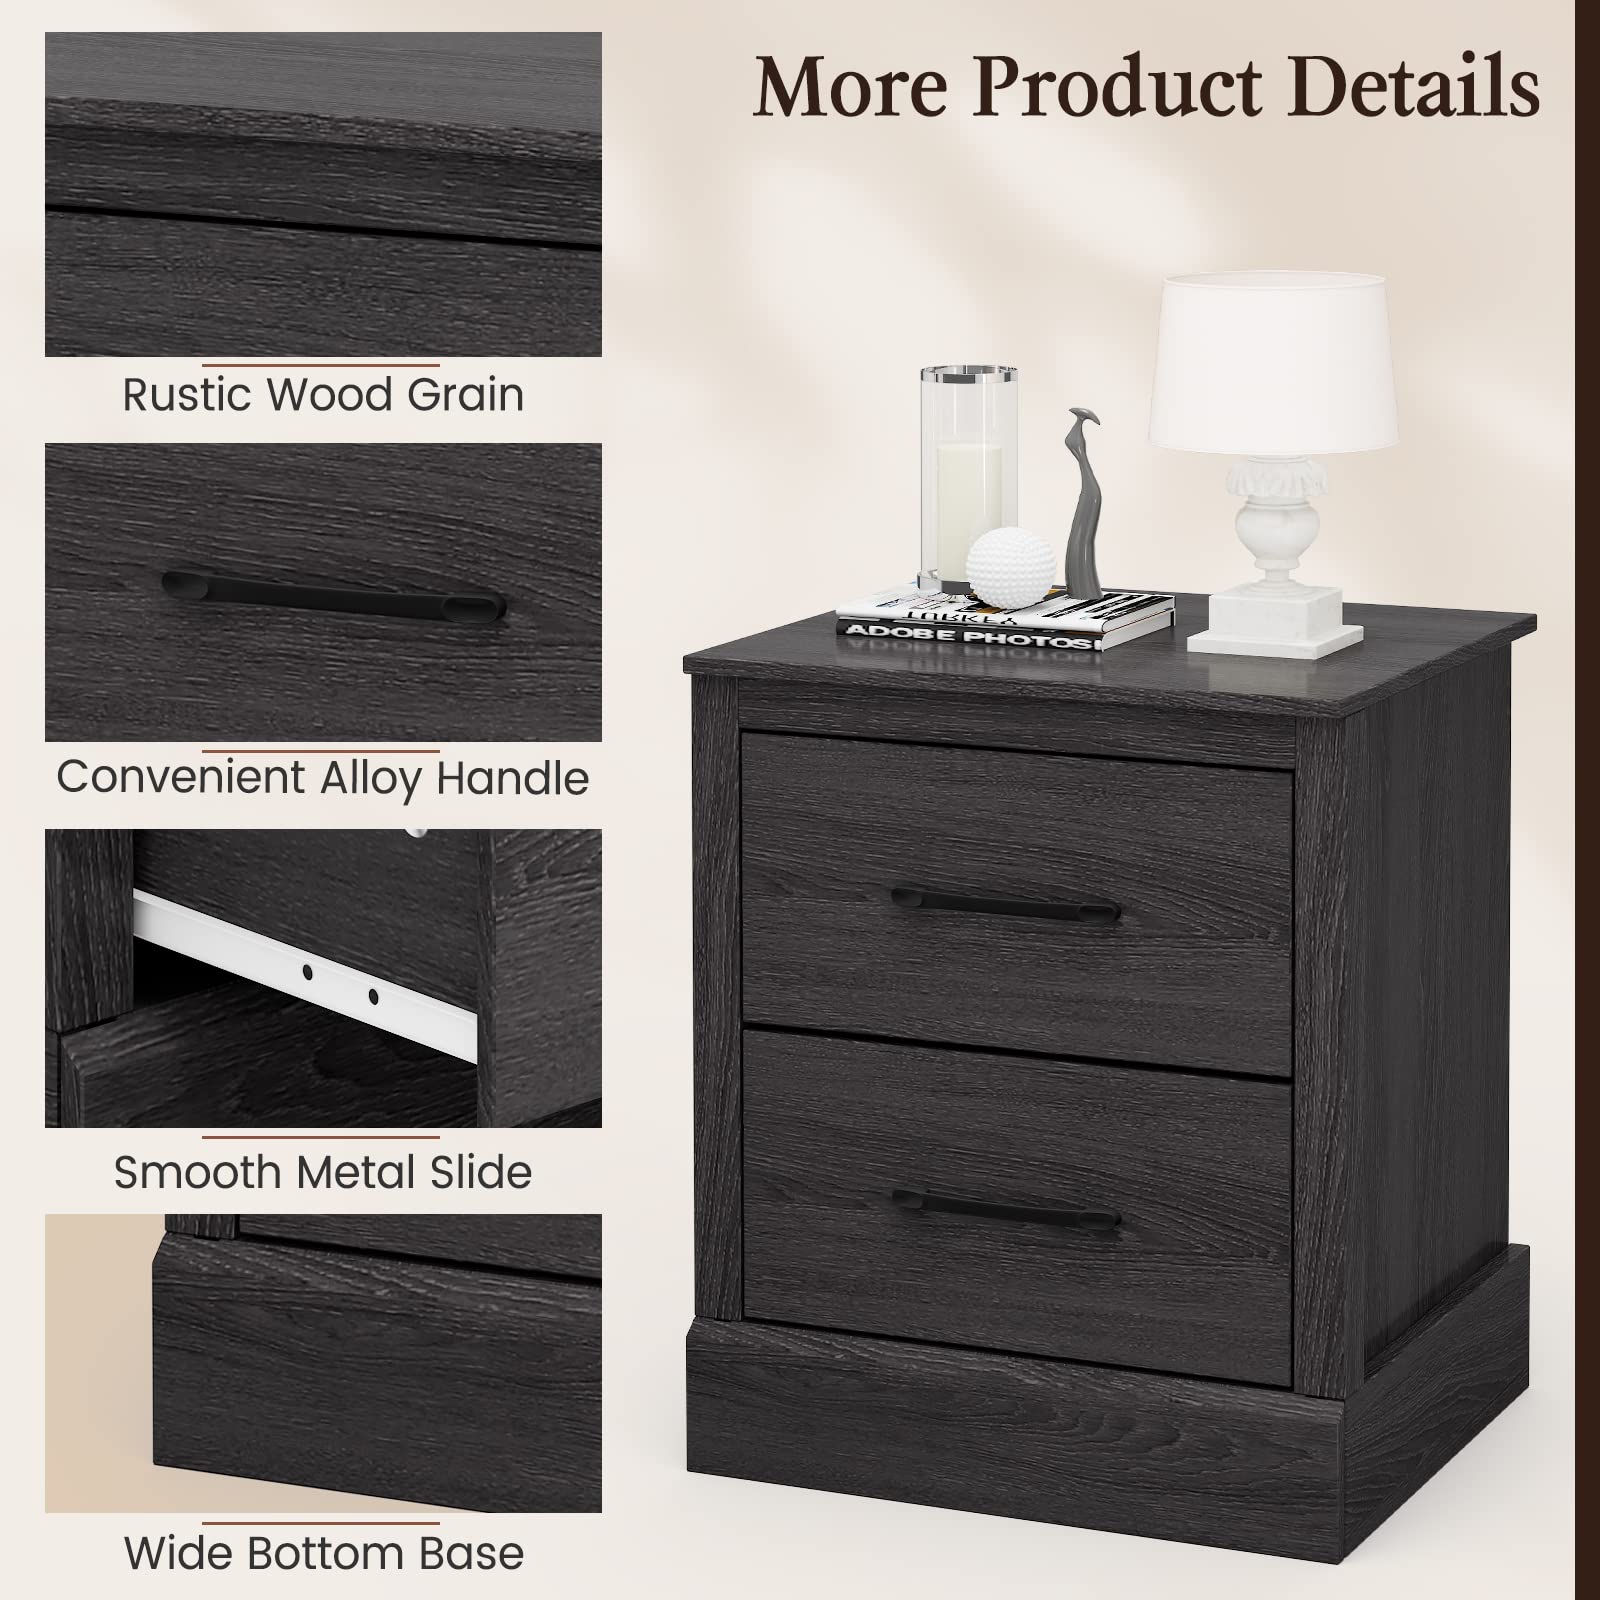 Giantex Farmhouse Nightstand Set of 2, Wood Bedside Table with 2 Storage Drawers